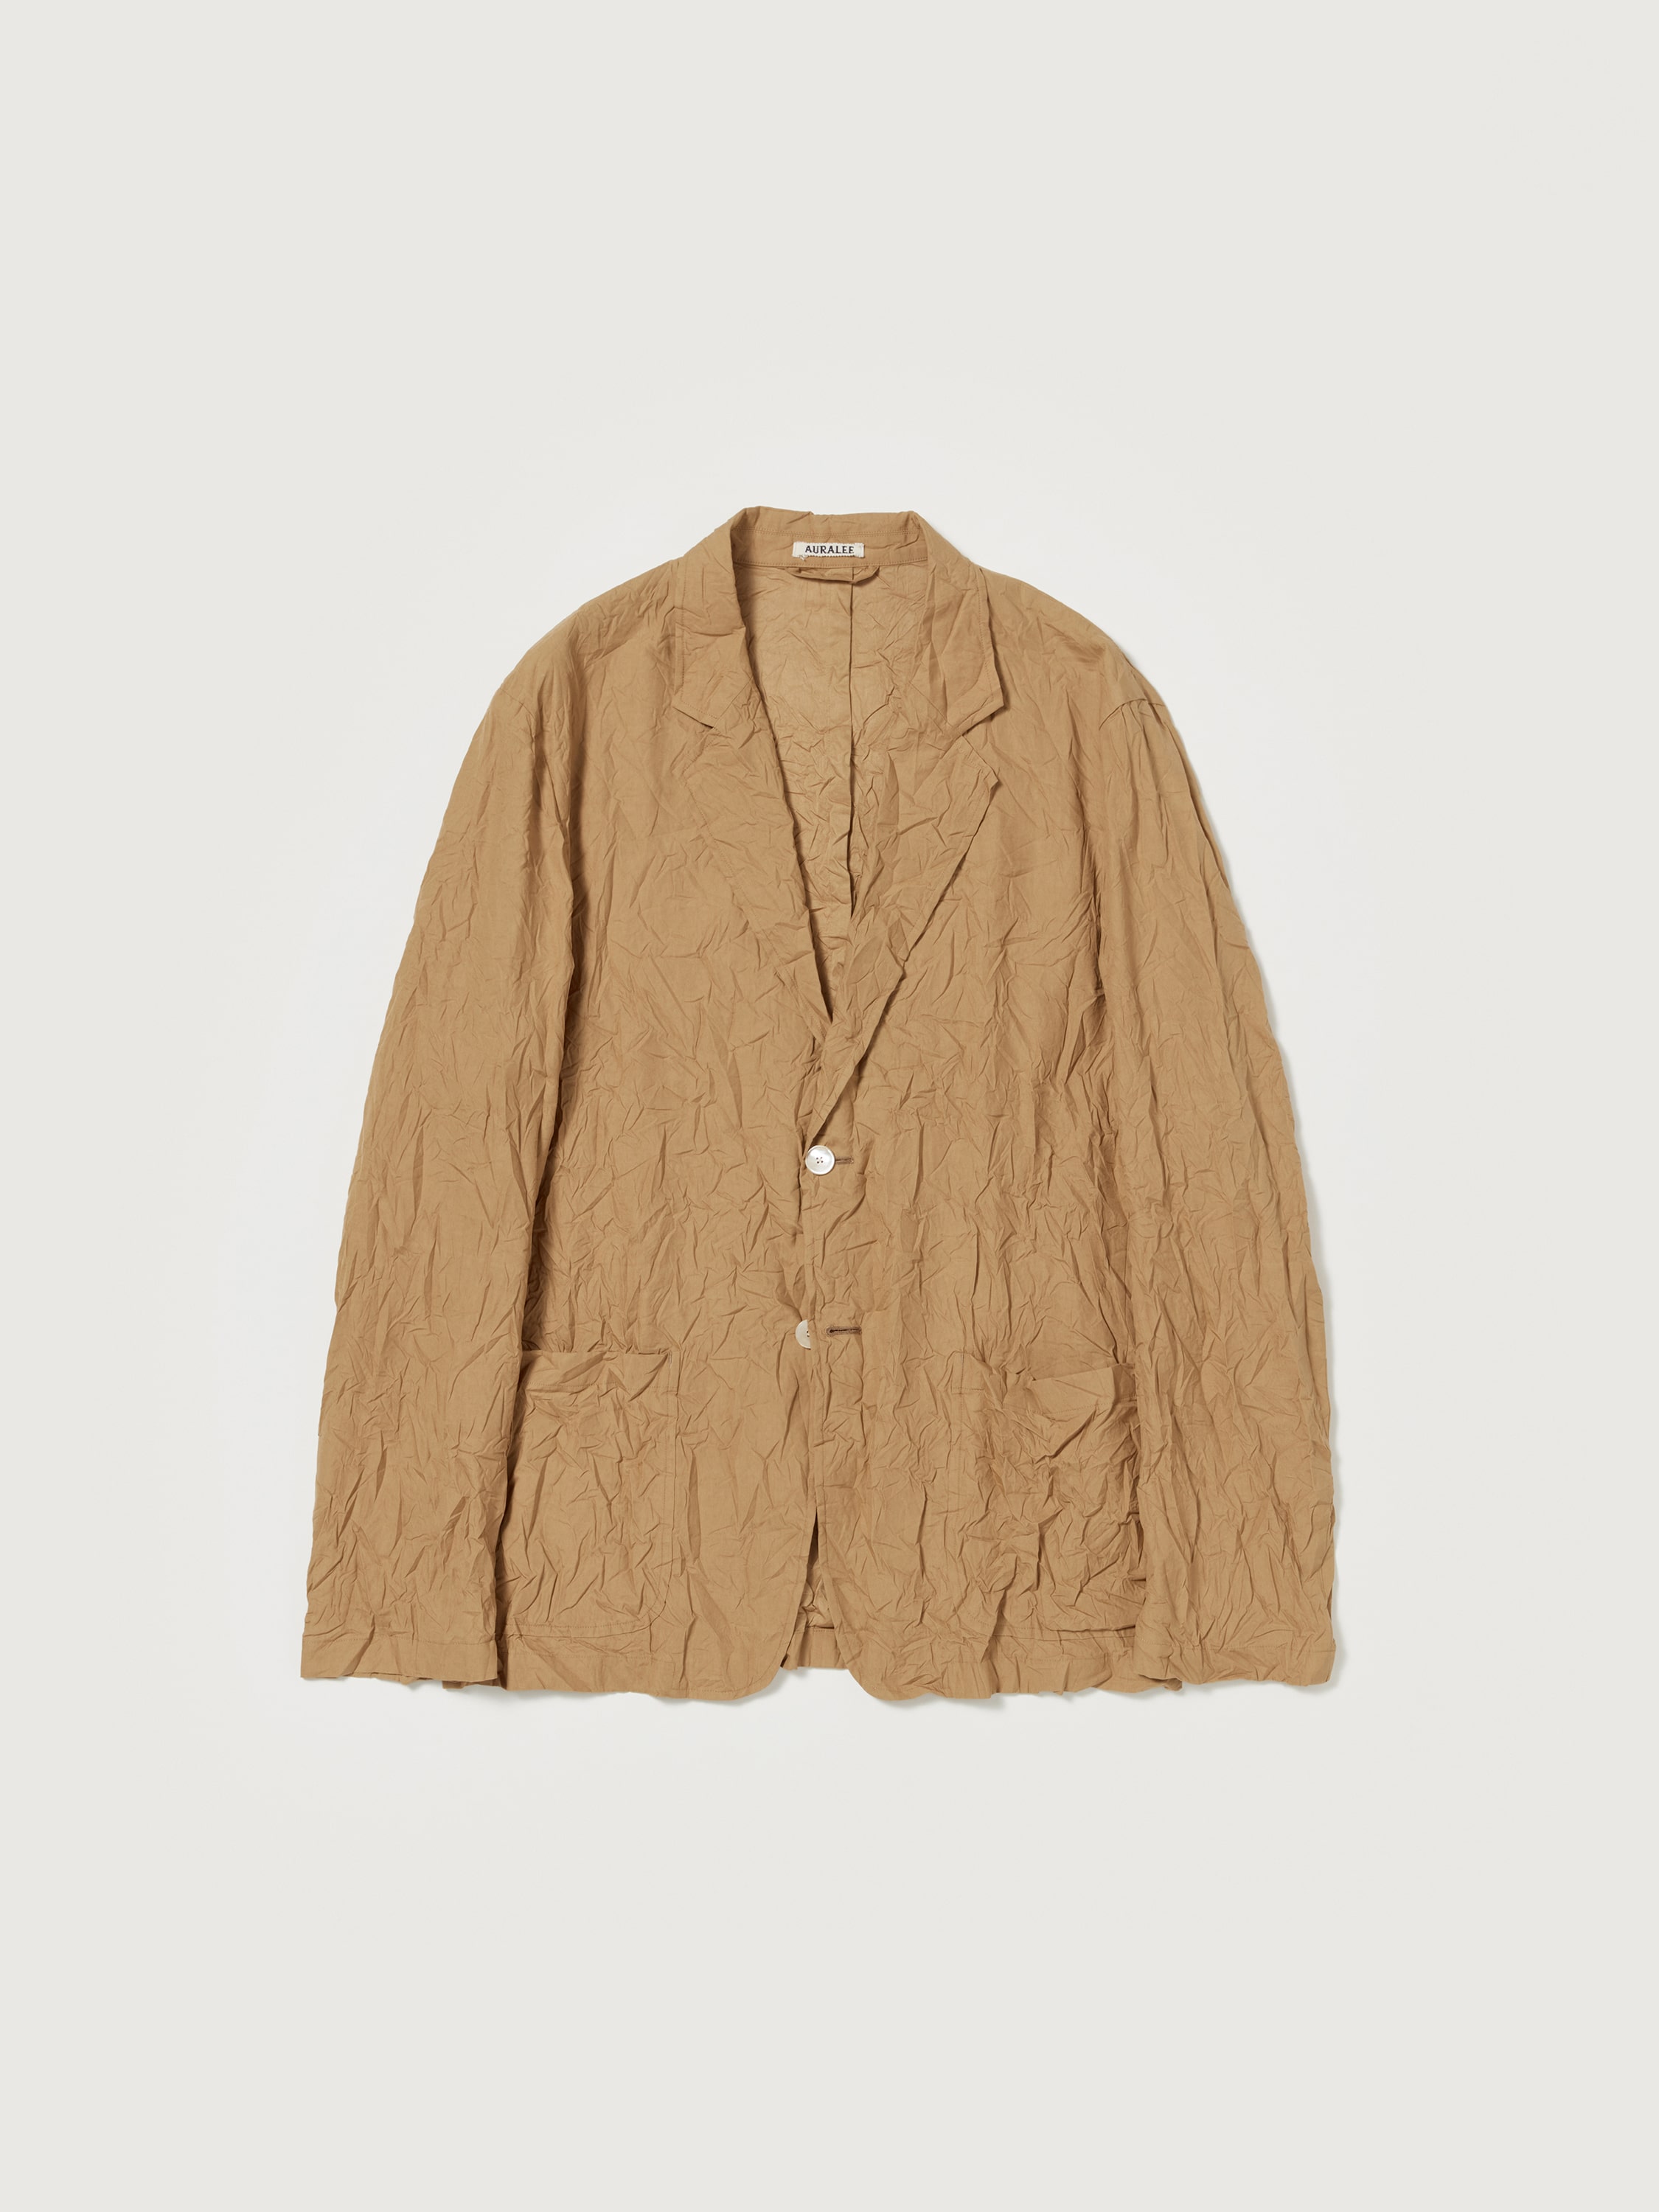 WRINKLED WASHED FINX TWILL JACKET 詳細画像 BROWN 5